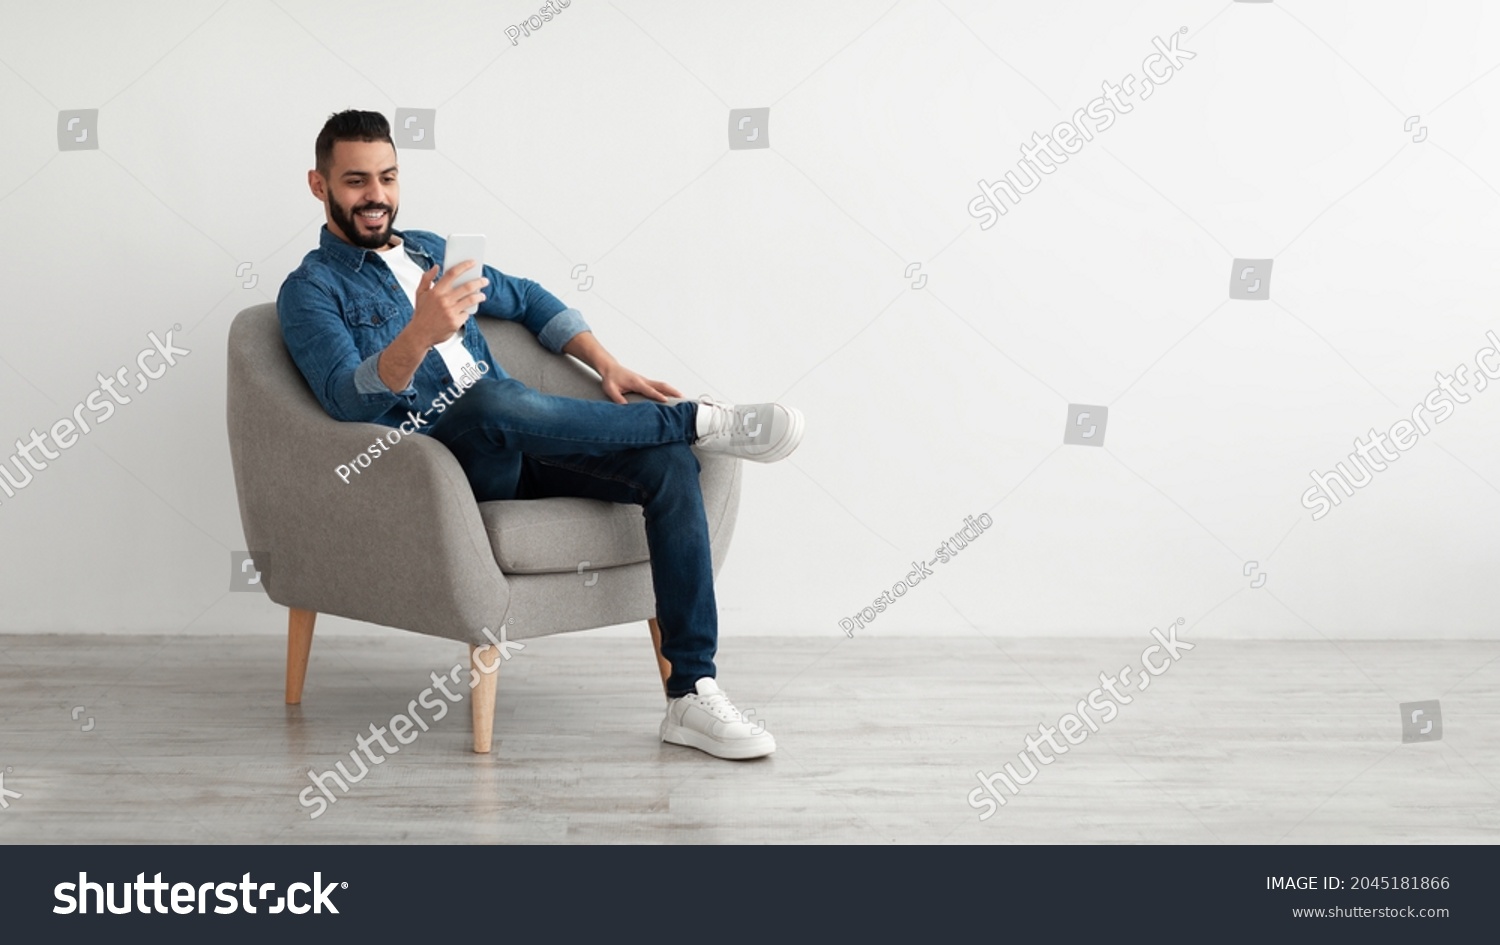 Cheerful young Arab man having online business meeting on smartphone, sitting in cozy armchair near white wall, banner design with free space. Eastern guy communicating remotely on mobile device #2045181866